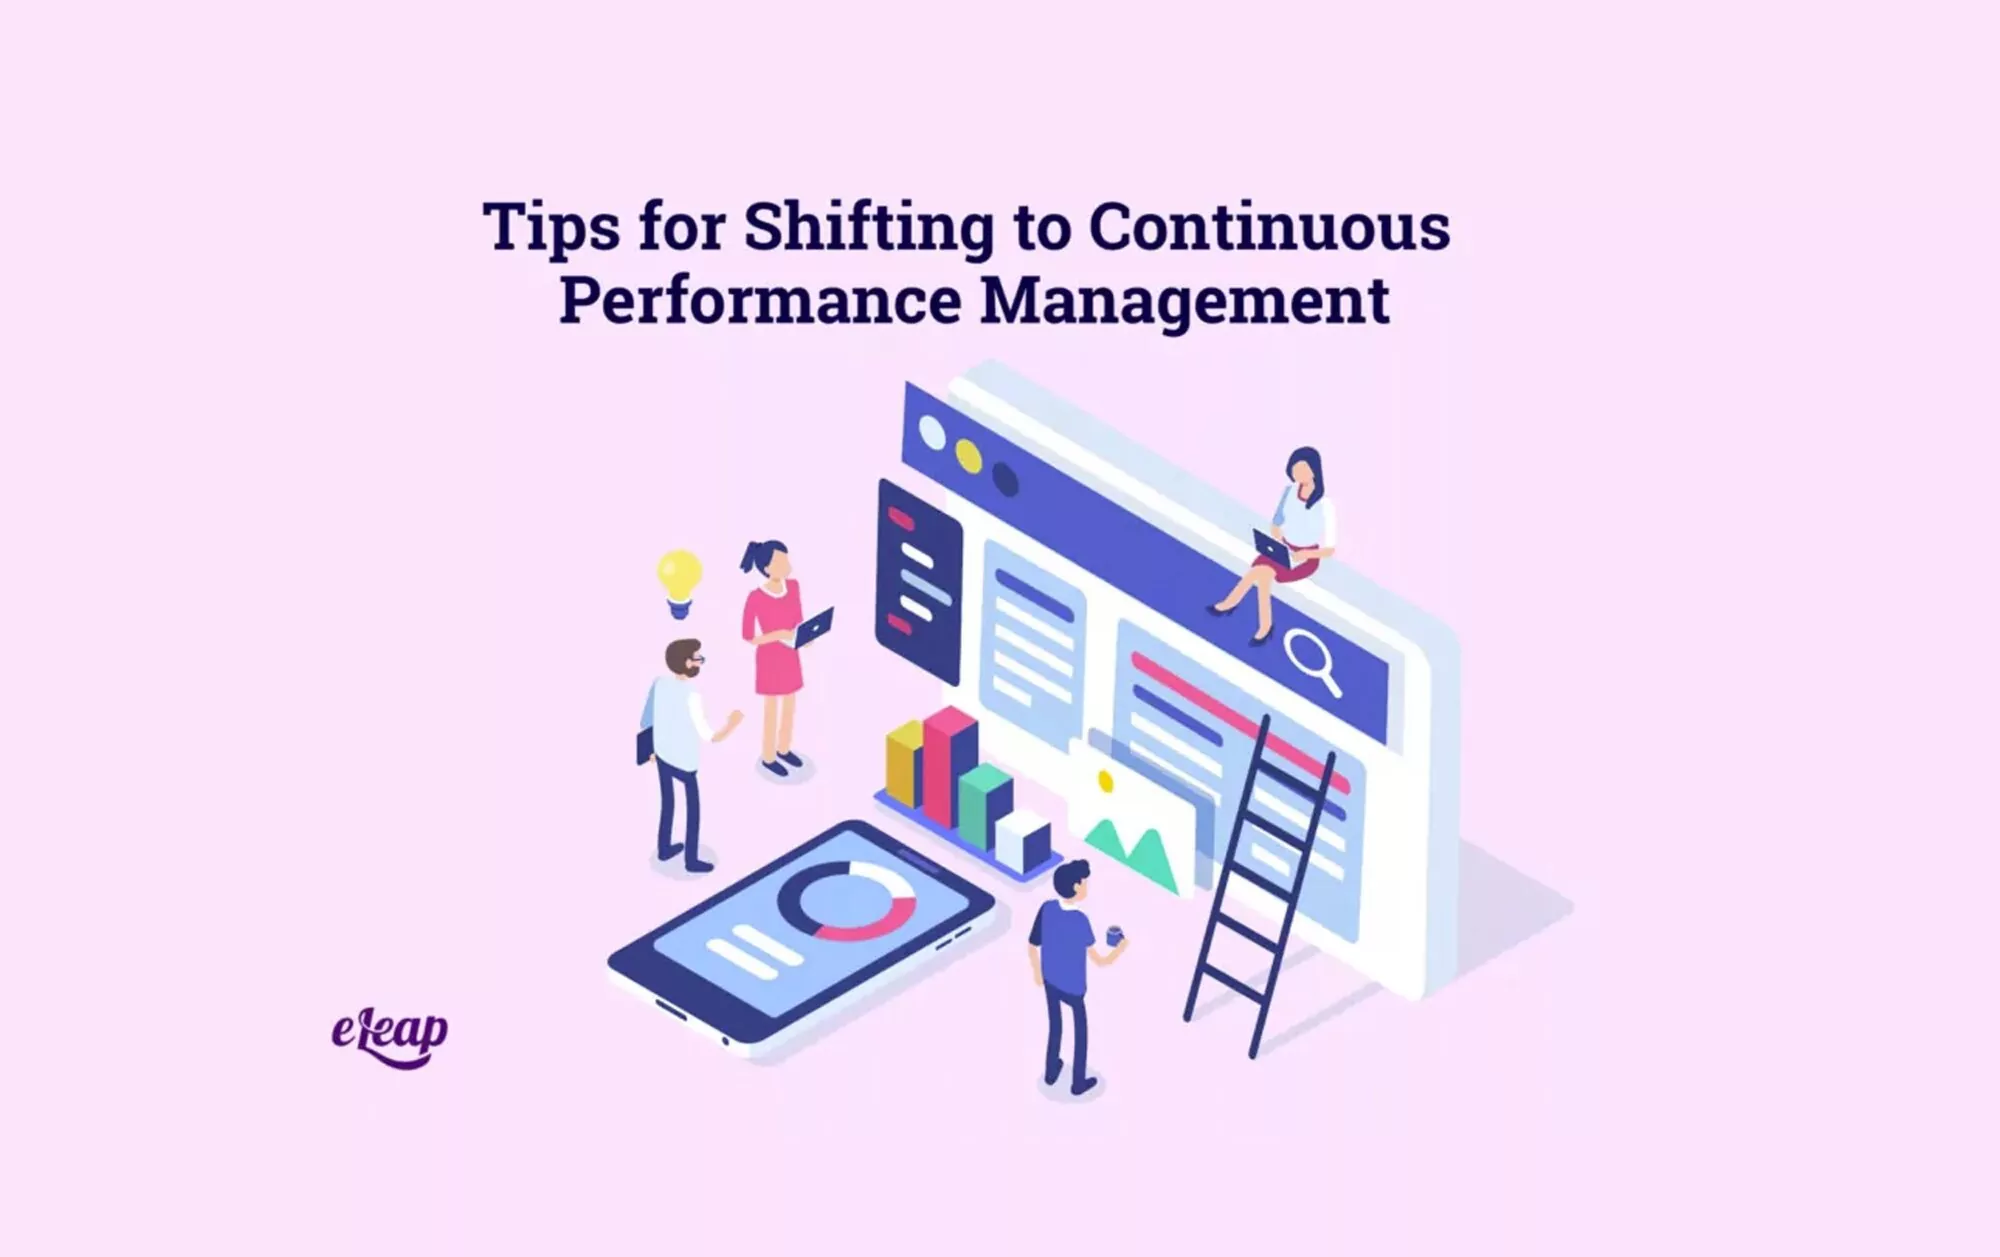 Tips for Shifting to Continuous Performance Management